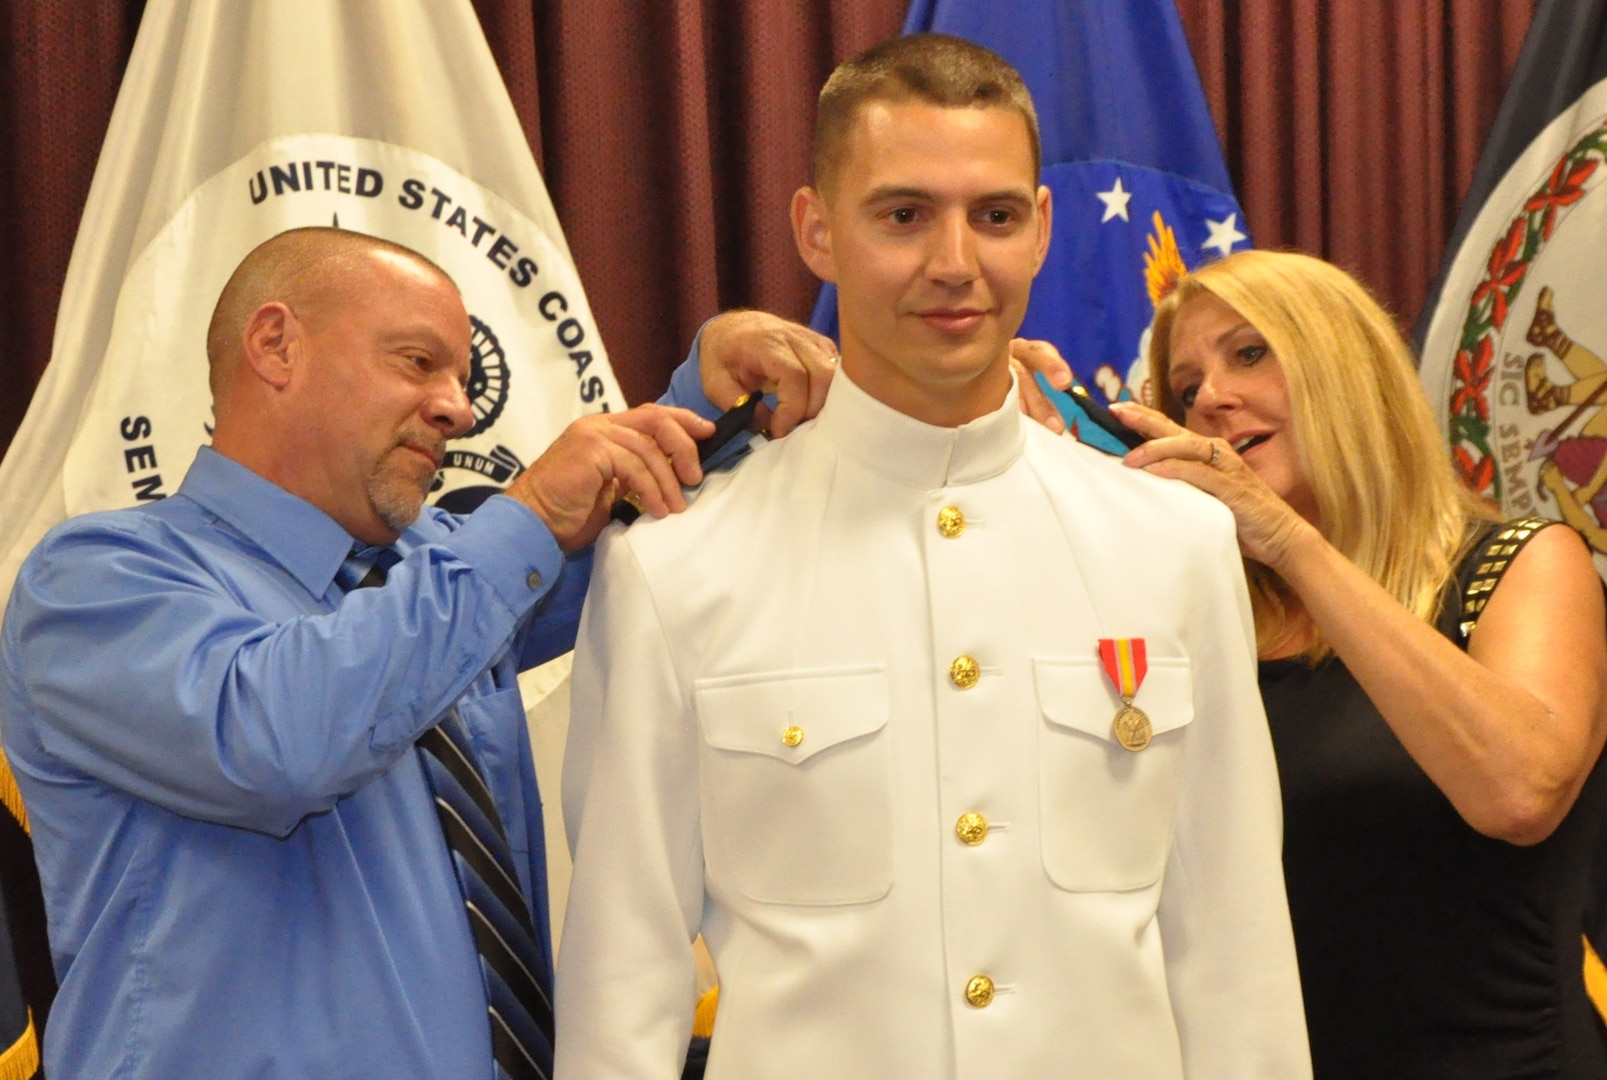 IMAGE: DAHLGREN, Va. (Sept. 11, 2018) – U.S. Navy Ensign Dillard Patton’s parents, Dale and Sharon, place officer shoulder boards on their son’s uniform at his commissioning ceremony held at the Aegis Training and Readiness Center. The NSWC Dahlgren Division System Safety Engineering Division civilian engineer was commissioned into the officer ranks of the Naval reserves through the Direct Commission Officer program. The newly commissioned officer expressed a special appreciation to his family during the ceremony. “Without your support, I wouldn’t be standing where I am today,” said Patton. “You have stood by my side through my best and my worst, but in all instances you motivated me to give it my all and succeed.”